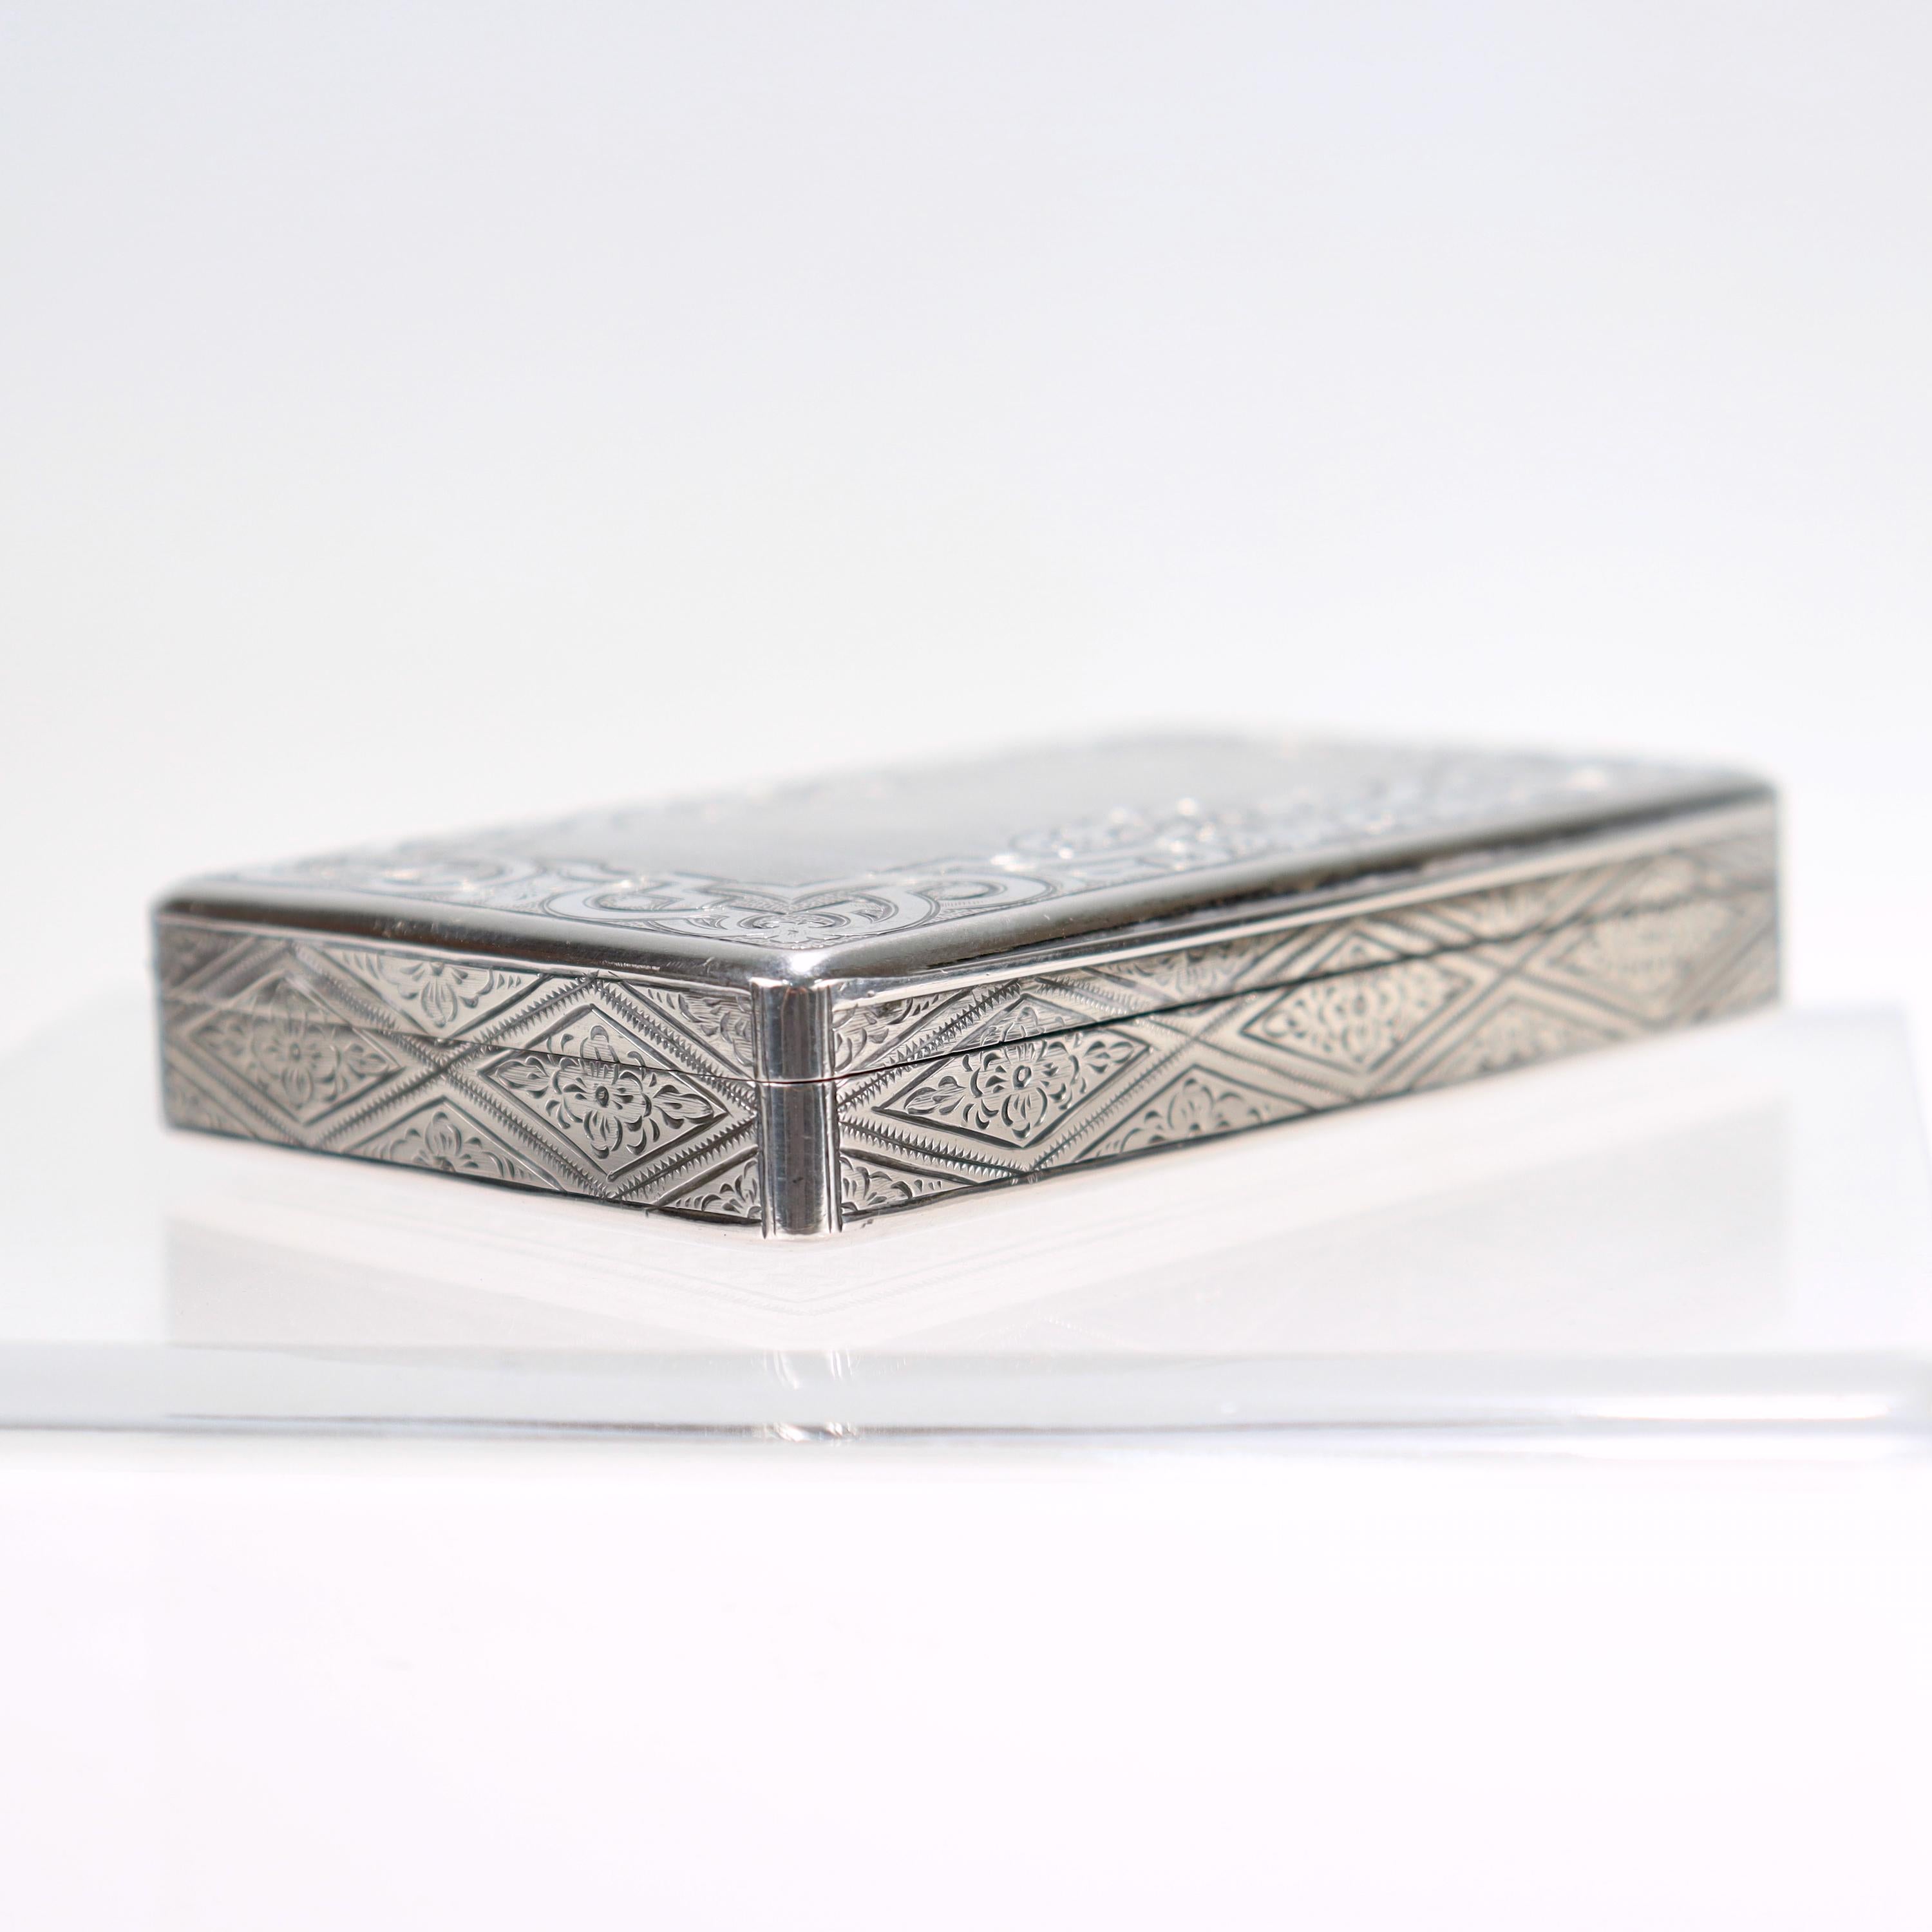 Antique Viennese or Austrian Engine-Turned Silver Card Case or Snuff Box For Sale 6